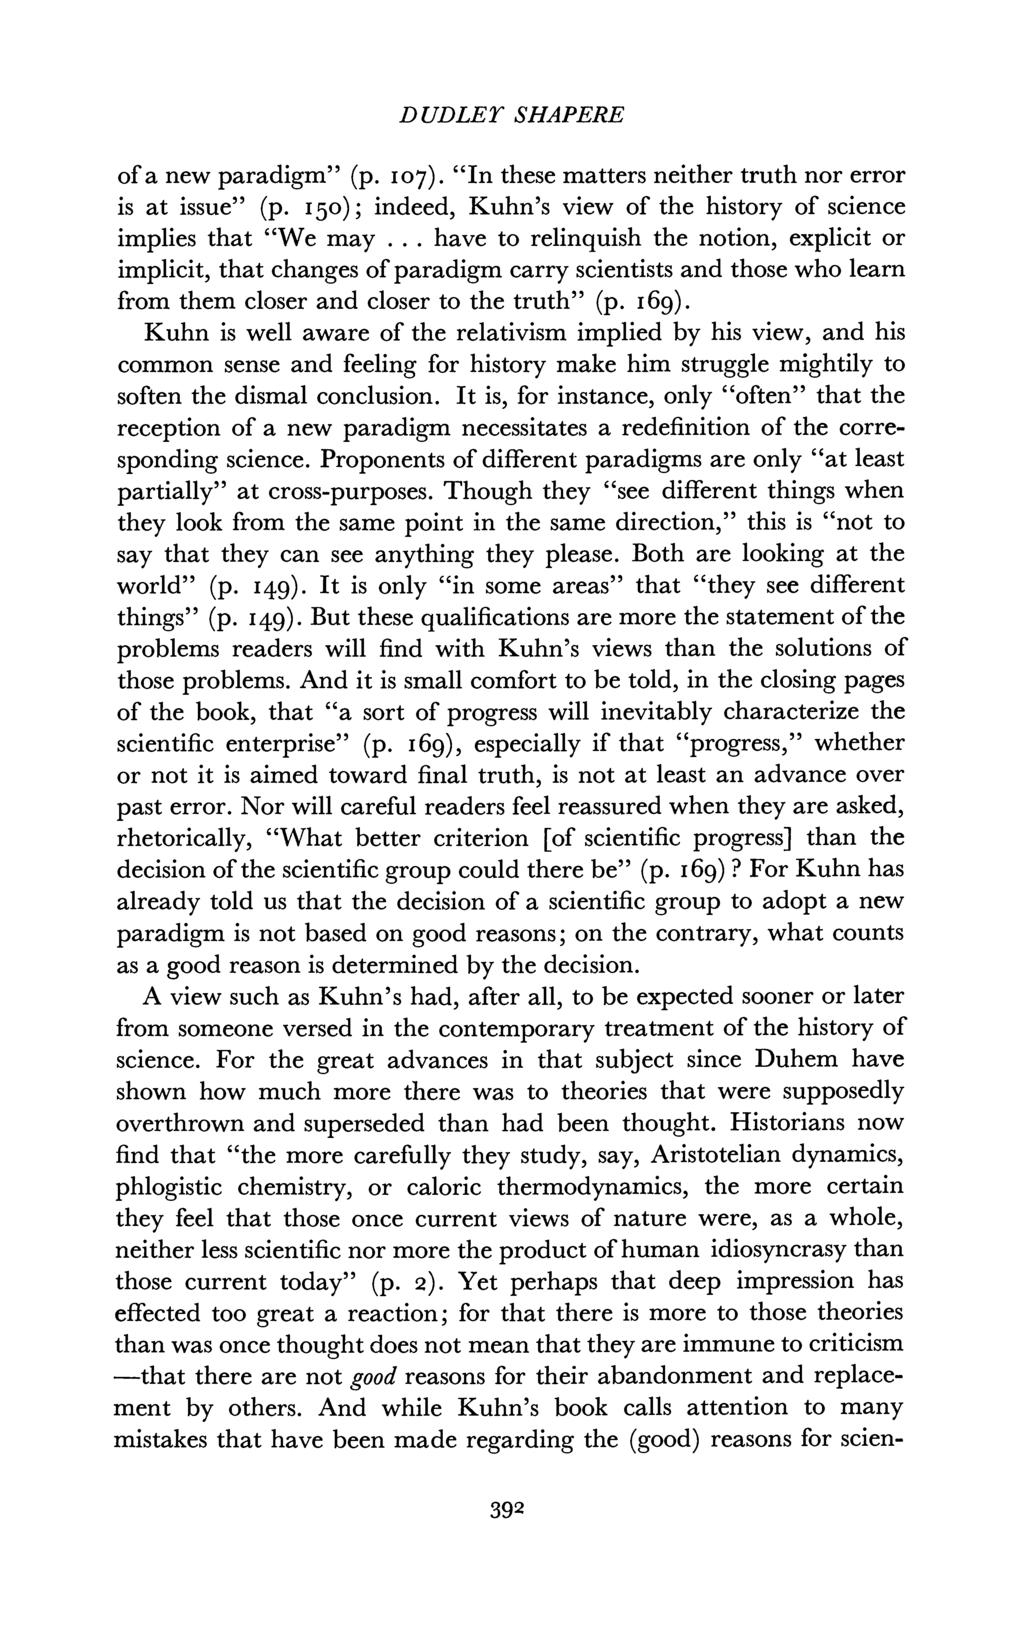 D UDLEY SHAPERE of a new paradigm" (p. I07). "In these matters neither truth nor error is at issue" (p. I50); indeed, Kuhn's view of the history of science implies that "We may.